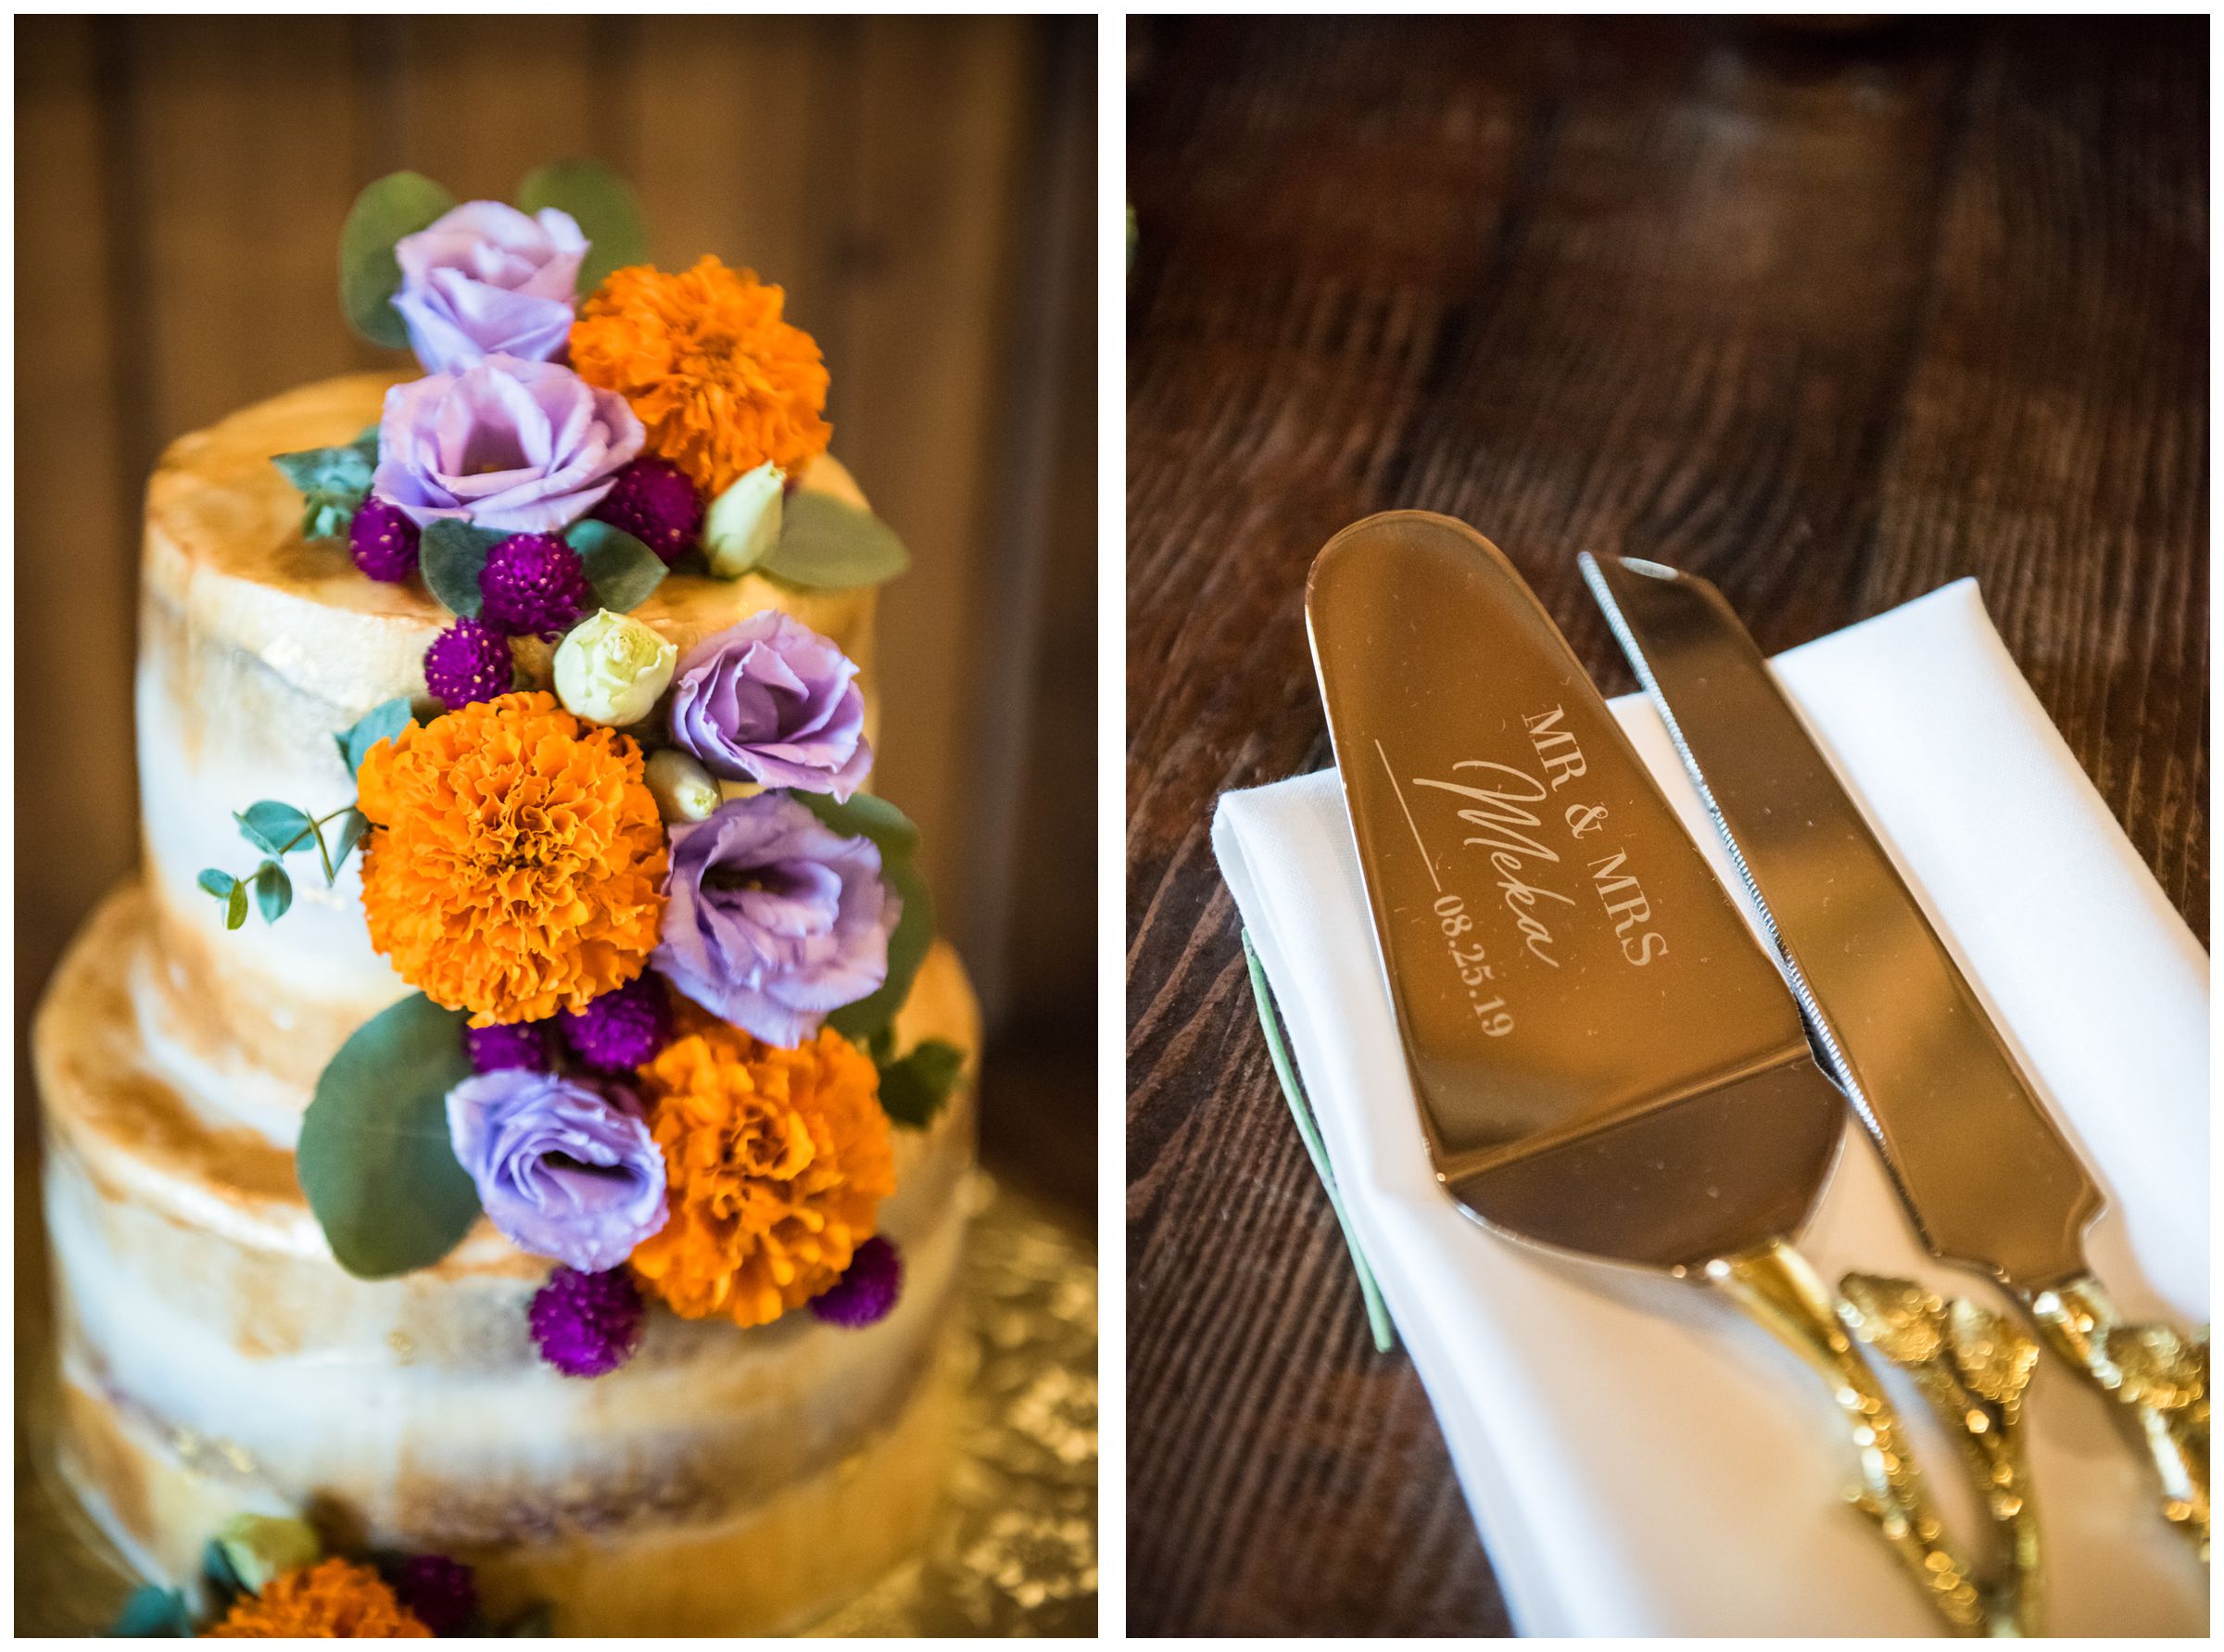 gold engraved wedding cake servers and cake with orange and purple flowers including Indian wedding flower marigolds